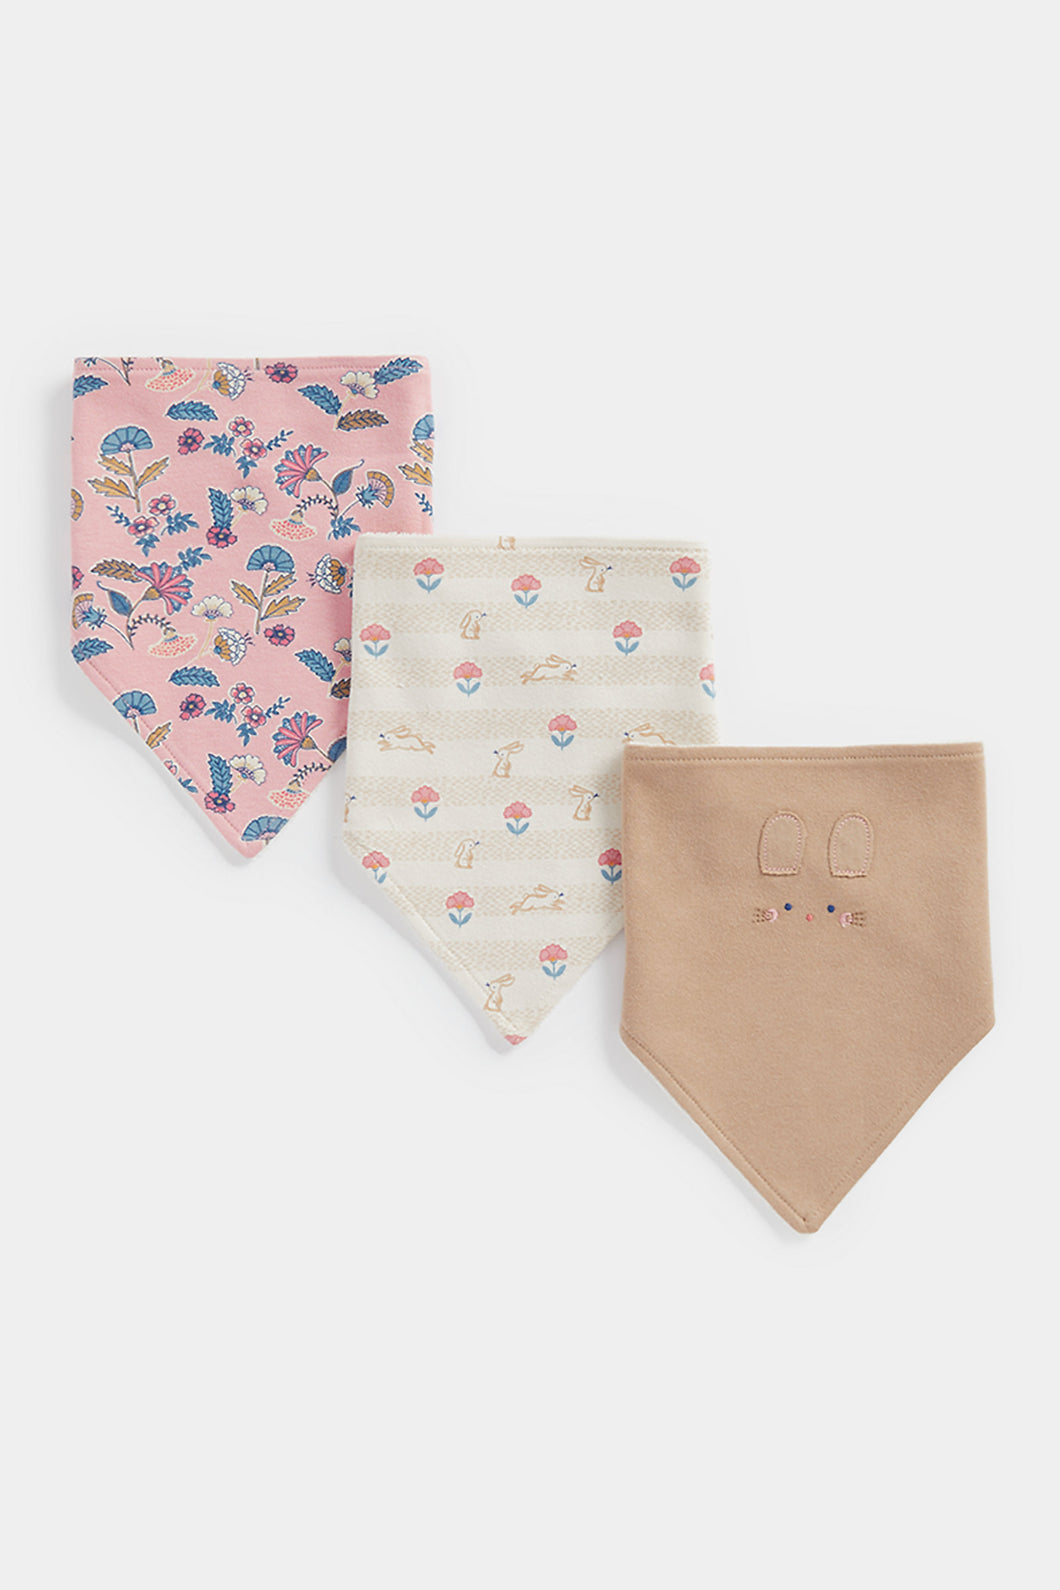 Mothercare Mouse and Floral Dribble Bibs - 3 Pack